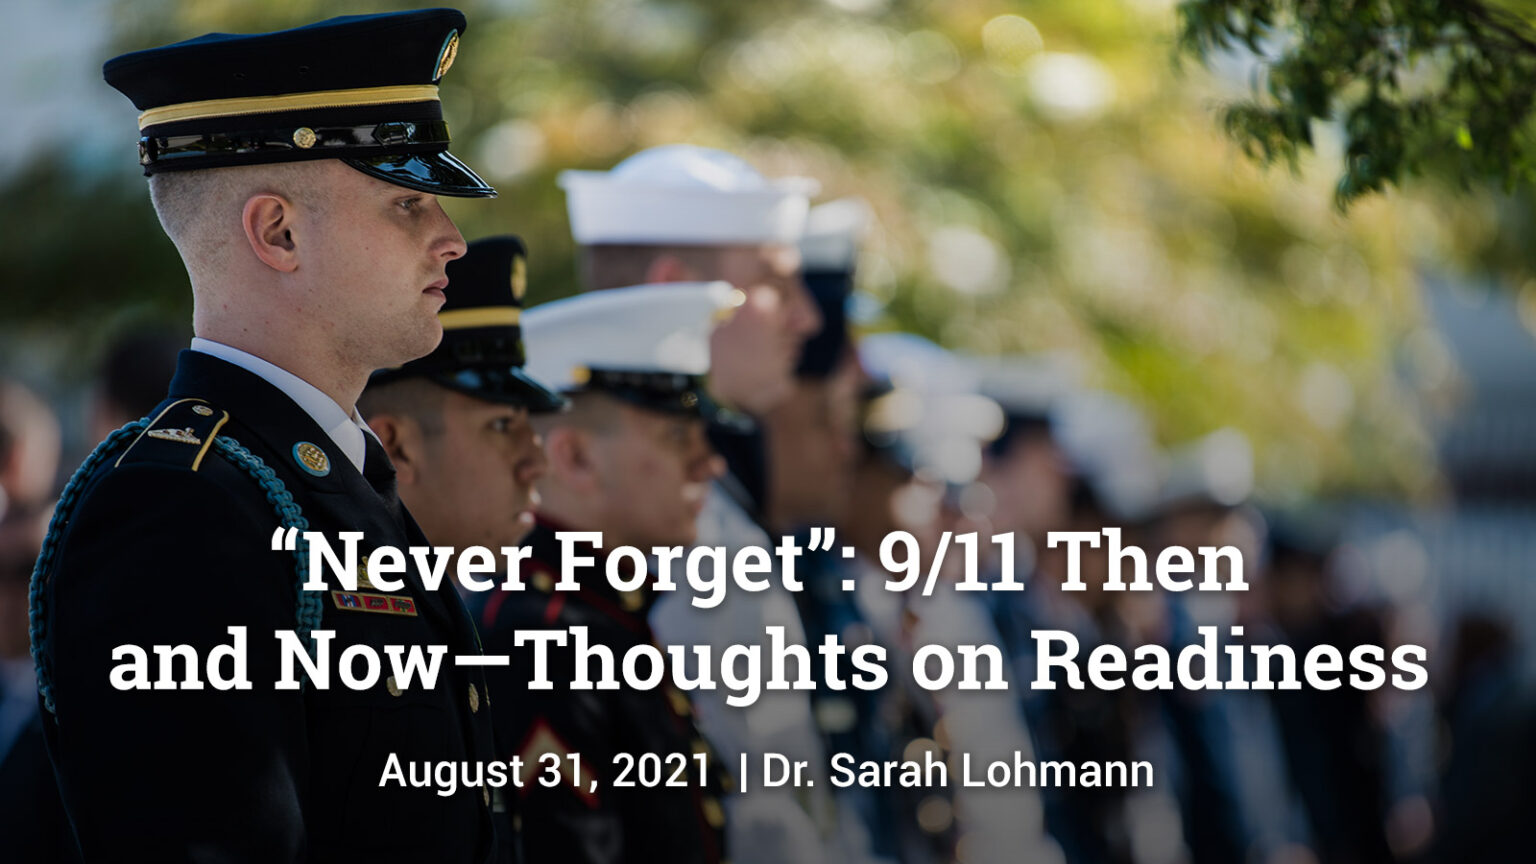  “Never Forget”: 9/11 Then and Now—Thoughts on Readiness | Lohmann